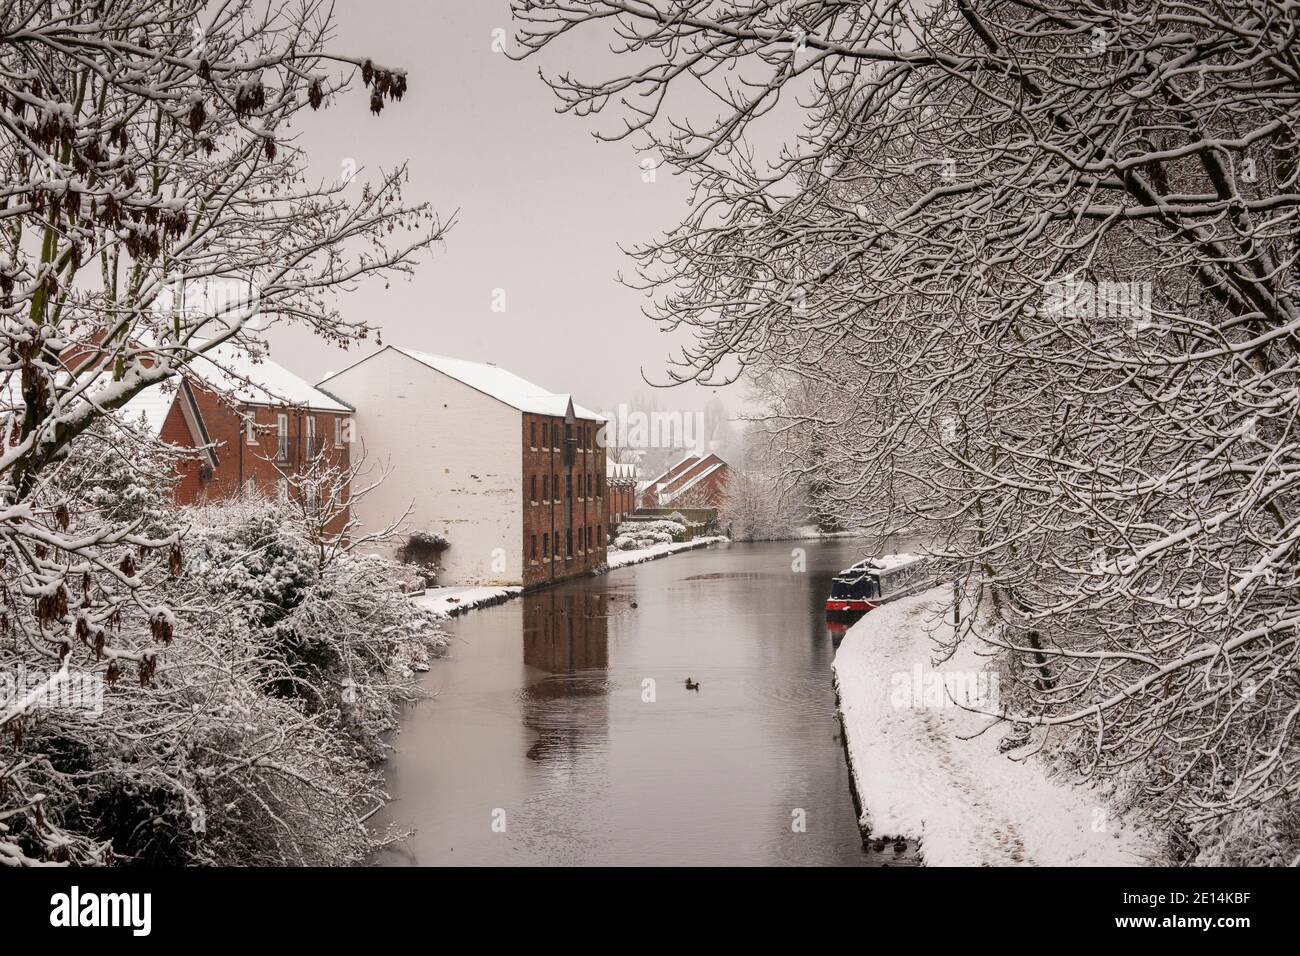 Royaume-Uni, Angleterre, Cheshire, Congleton, Mossley, canal Macclesfield, Old Wharf en hiver Banque D'Images